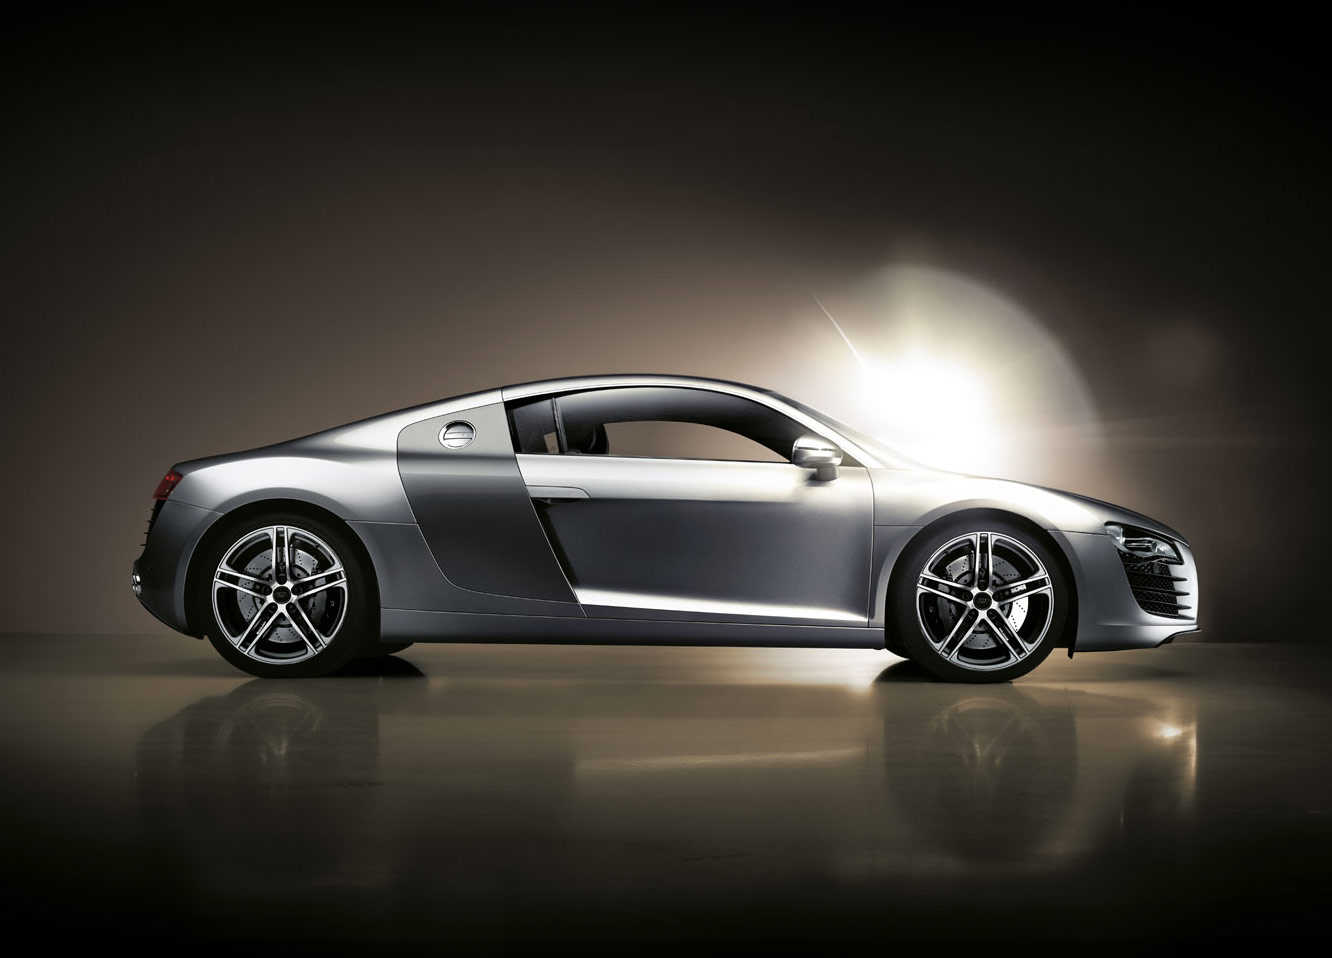 Audi R8 Cars pictures wallpapers and audi cars for sale 2010